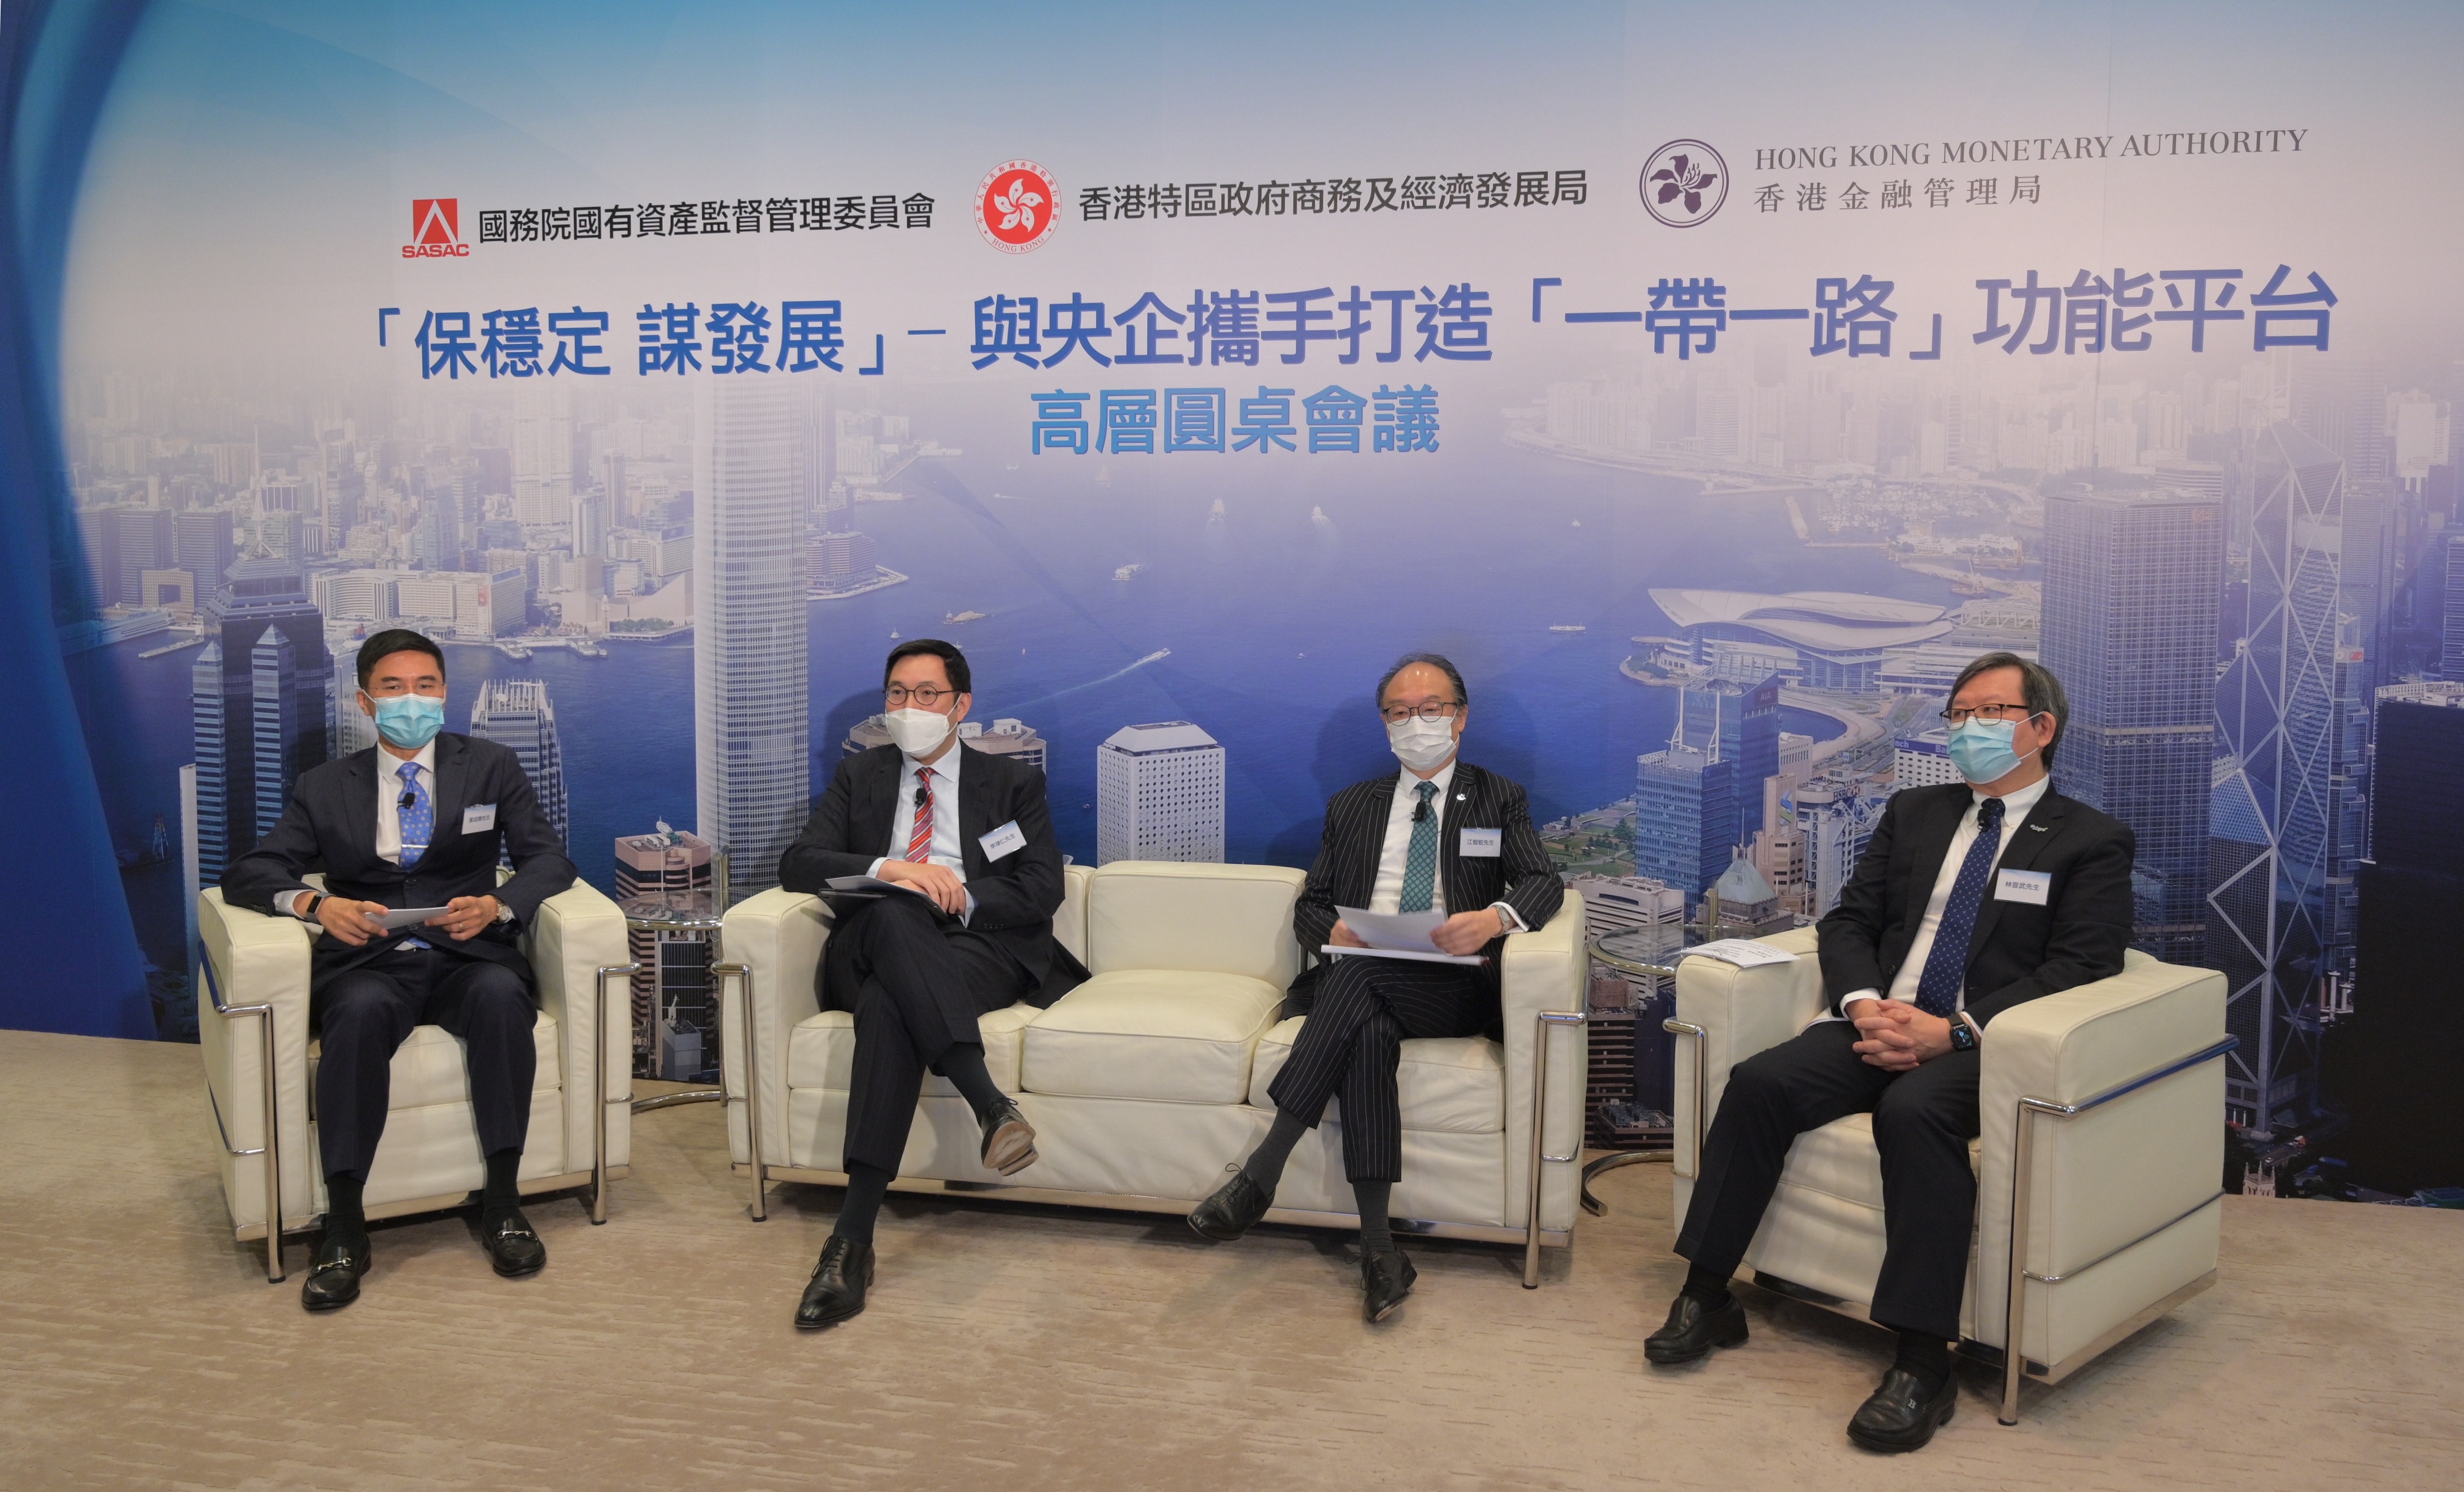 The Commerce and Economic Development Bureau, the State-owned Assets Supervision and Administration Commission of the State Council and the Hong Kong Monetary Authority jointly organised a high-level roundtable on "Fostering Hong Kong as Belt and Road Functional Platform together with State-owned Enterprises" in an online format on 8 January 2021. Photo shows the Commissioner for Belt and Road, Mr Denis Yip (first left), moderating a discussion session at the roundtable joined by (from second left) the Chairman of the Financial Services Development Council, Mr Laurence Li; the Immediate Past President of the Hong Kong Institute of Certified Public Accountants, Mr Johnson Kong; and the Chairman of the Hong Kong Productivity Council, Mr Willy Lin.